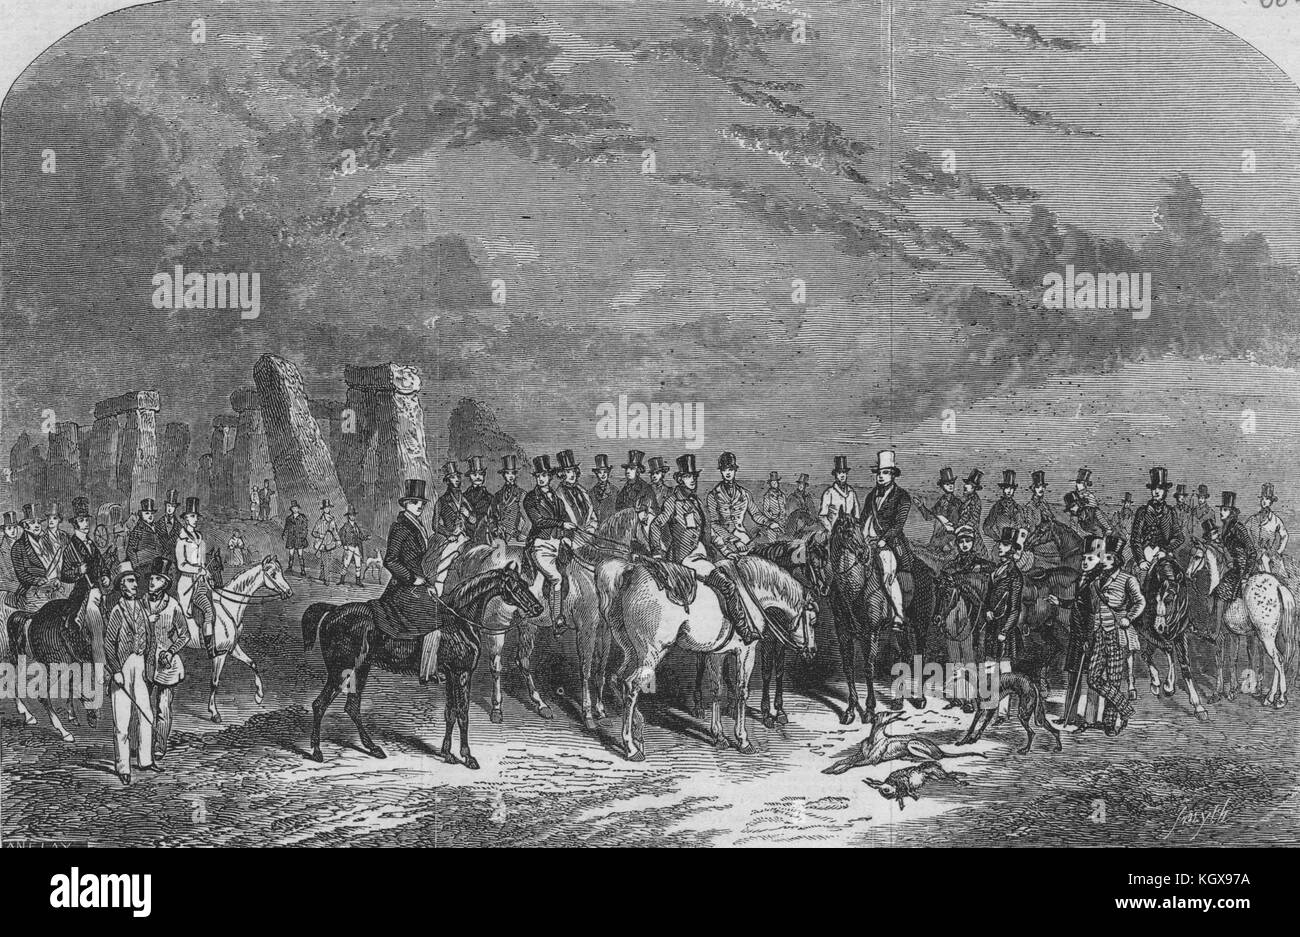 The Amesbury Coursing Meeting prize picture. Wiltshire 1847. The Illustrated London News Stock Photo